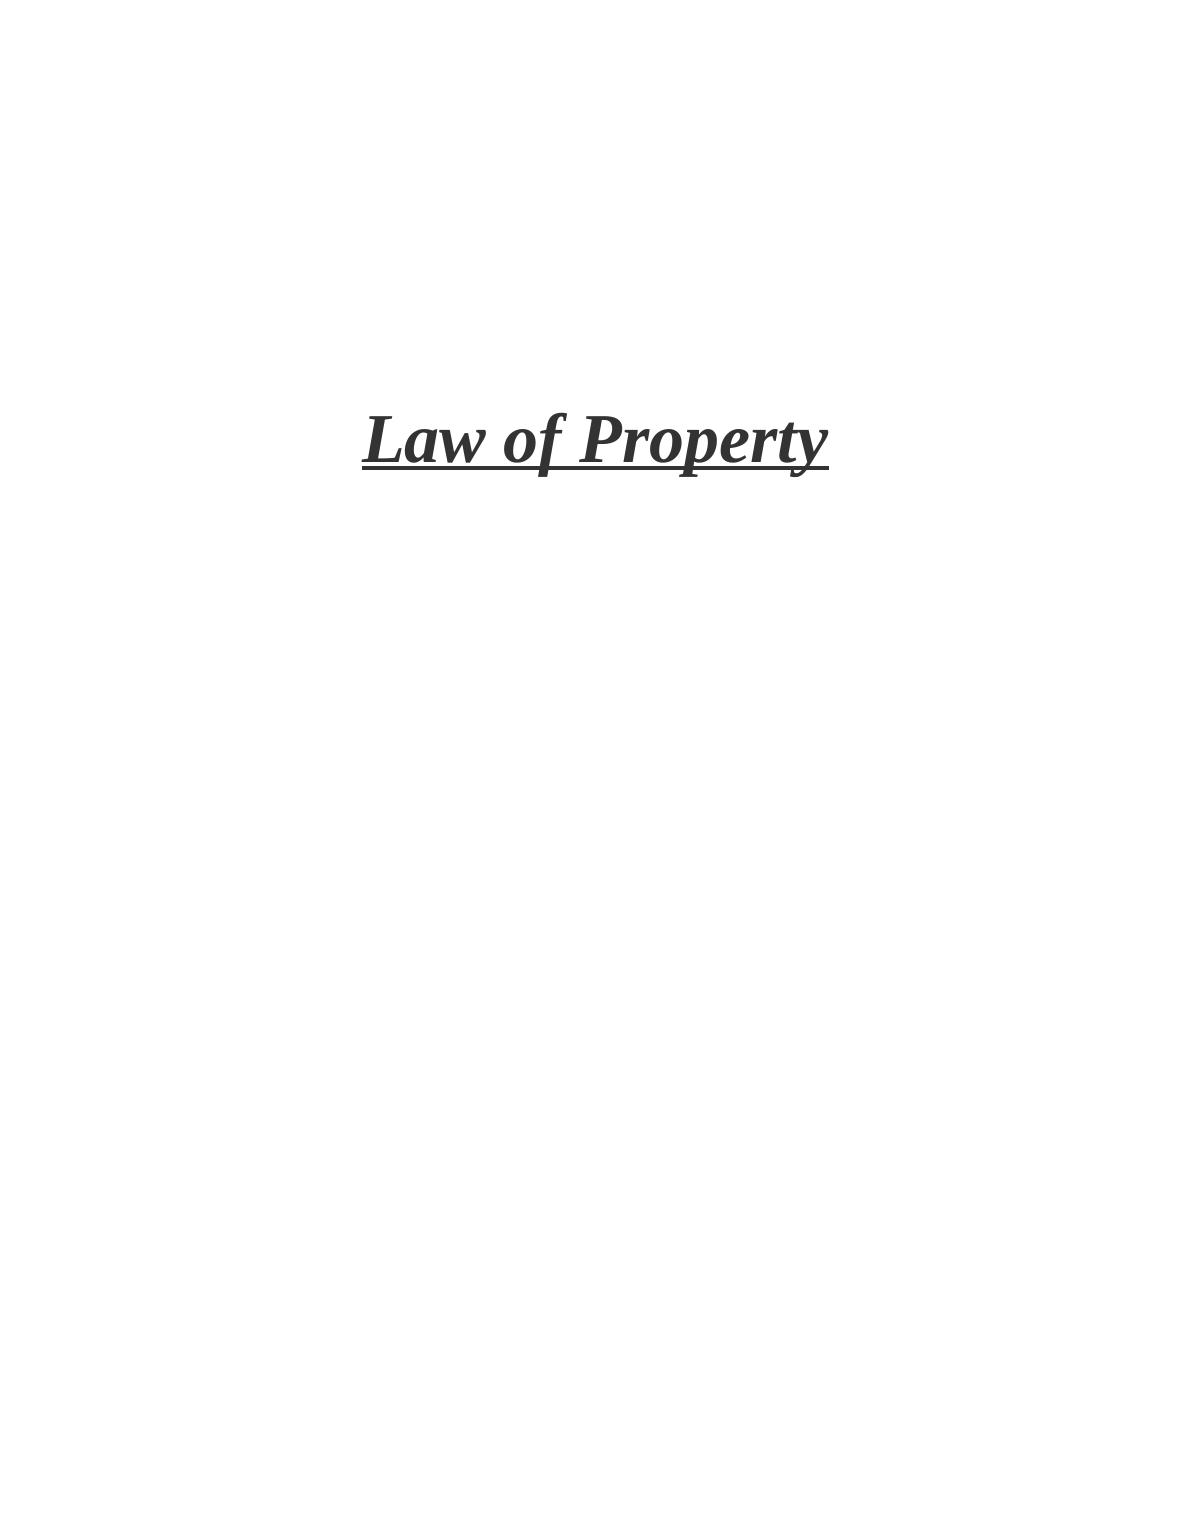 Property Law Assignment - Case of Street VS Mount ford_1